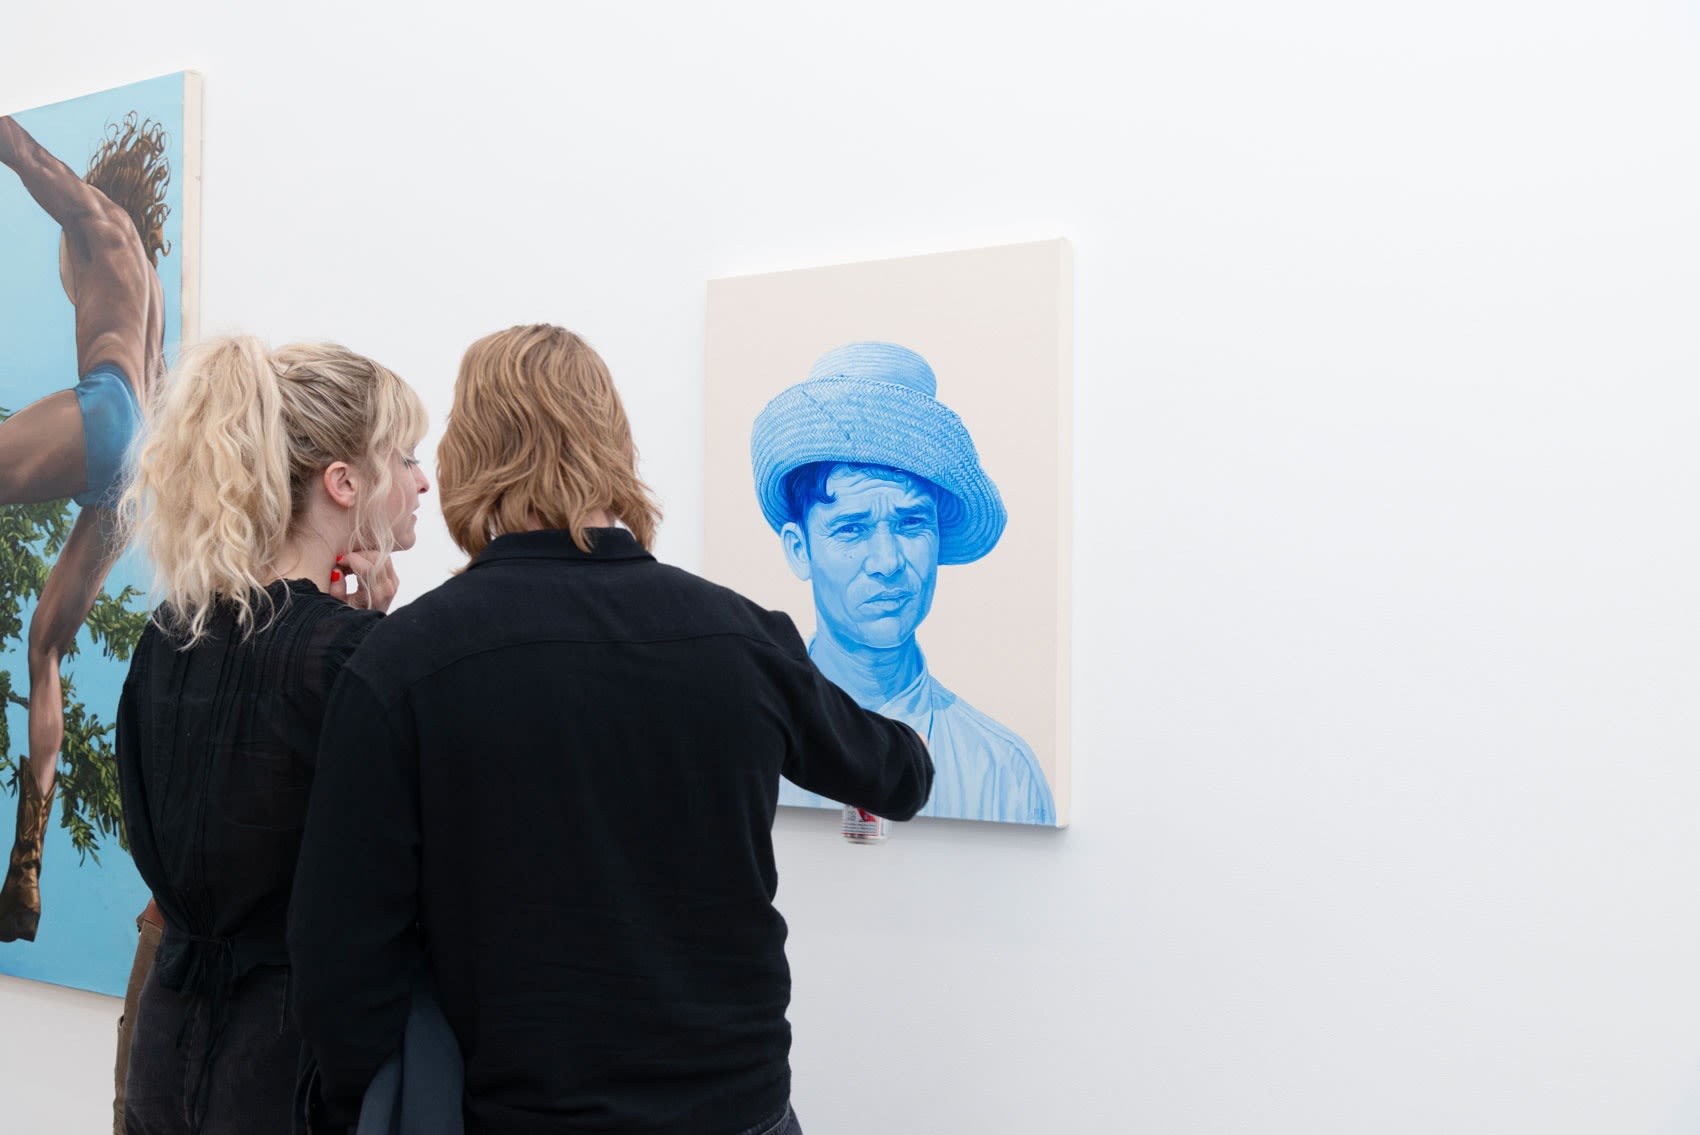 two people looking at a painting of a man on the wall